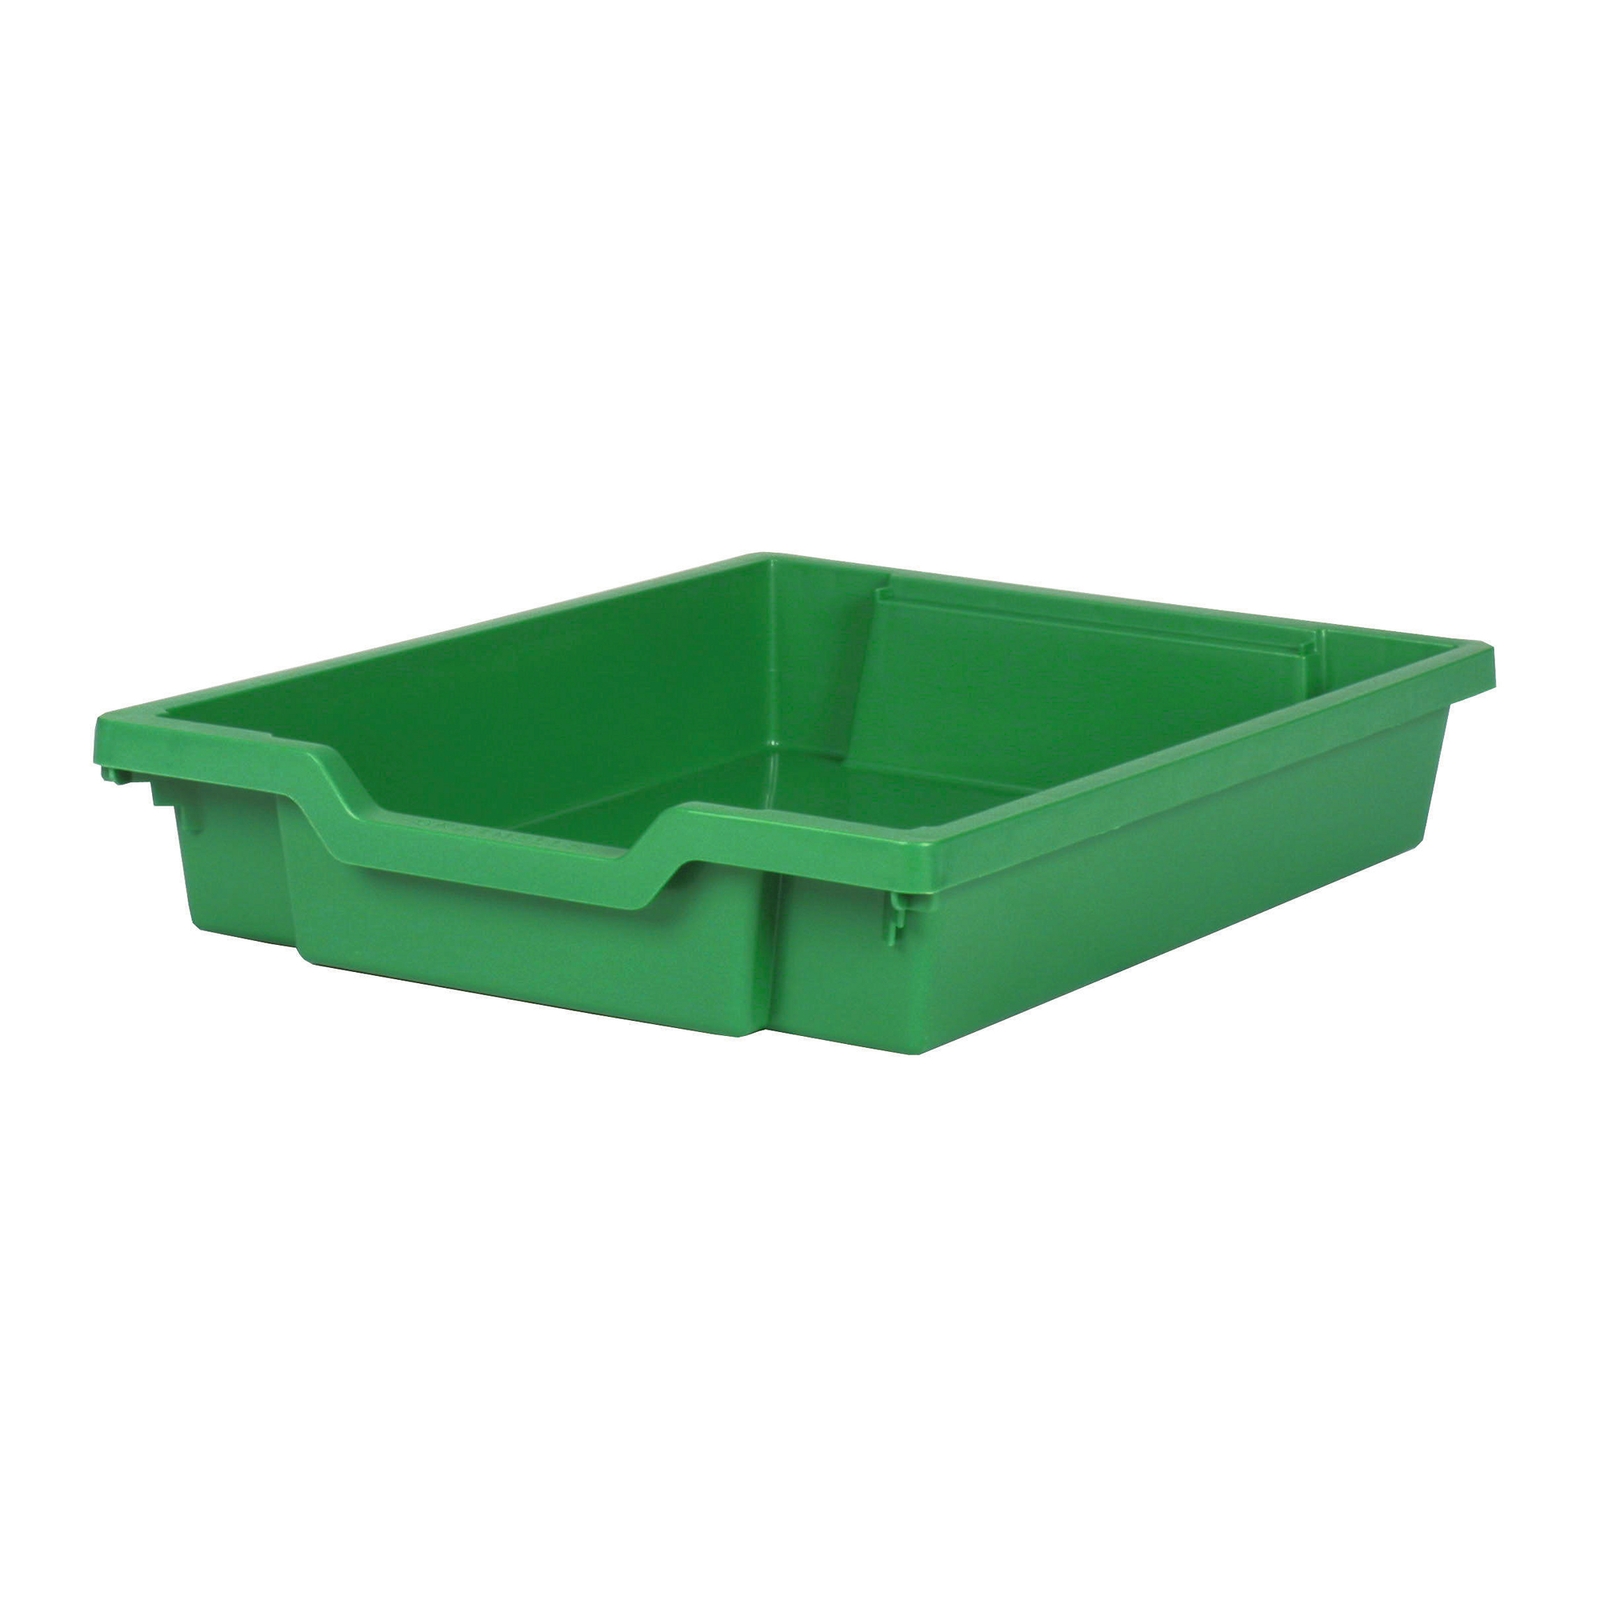 Gratnell Green Shallow Storage Tray - W312 x H75 x D427mm - Each